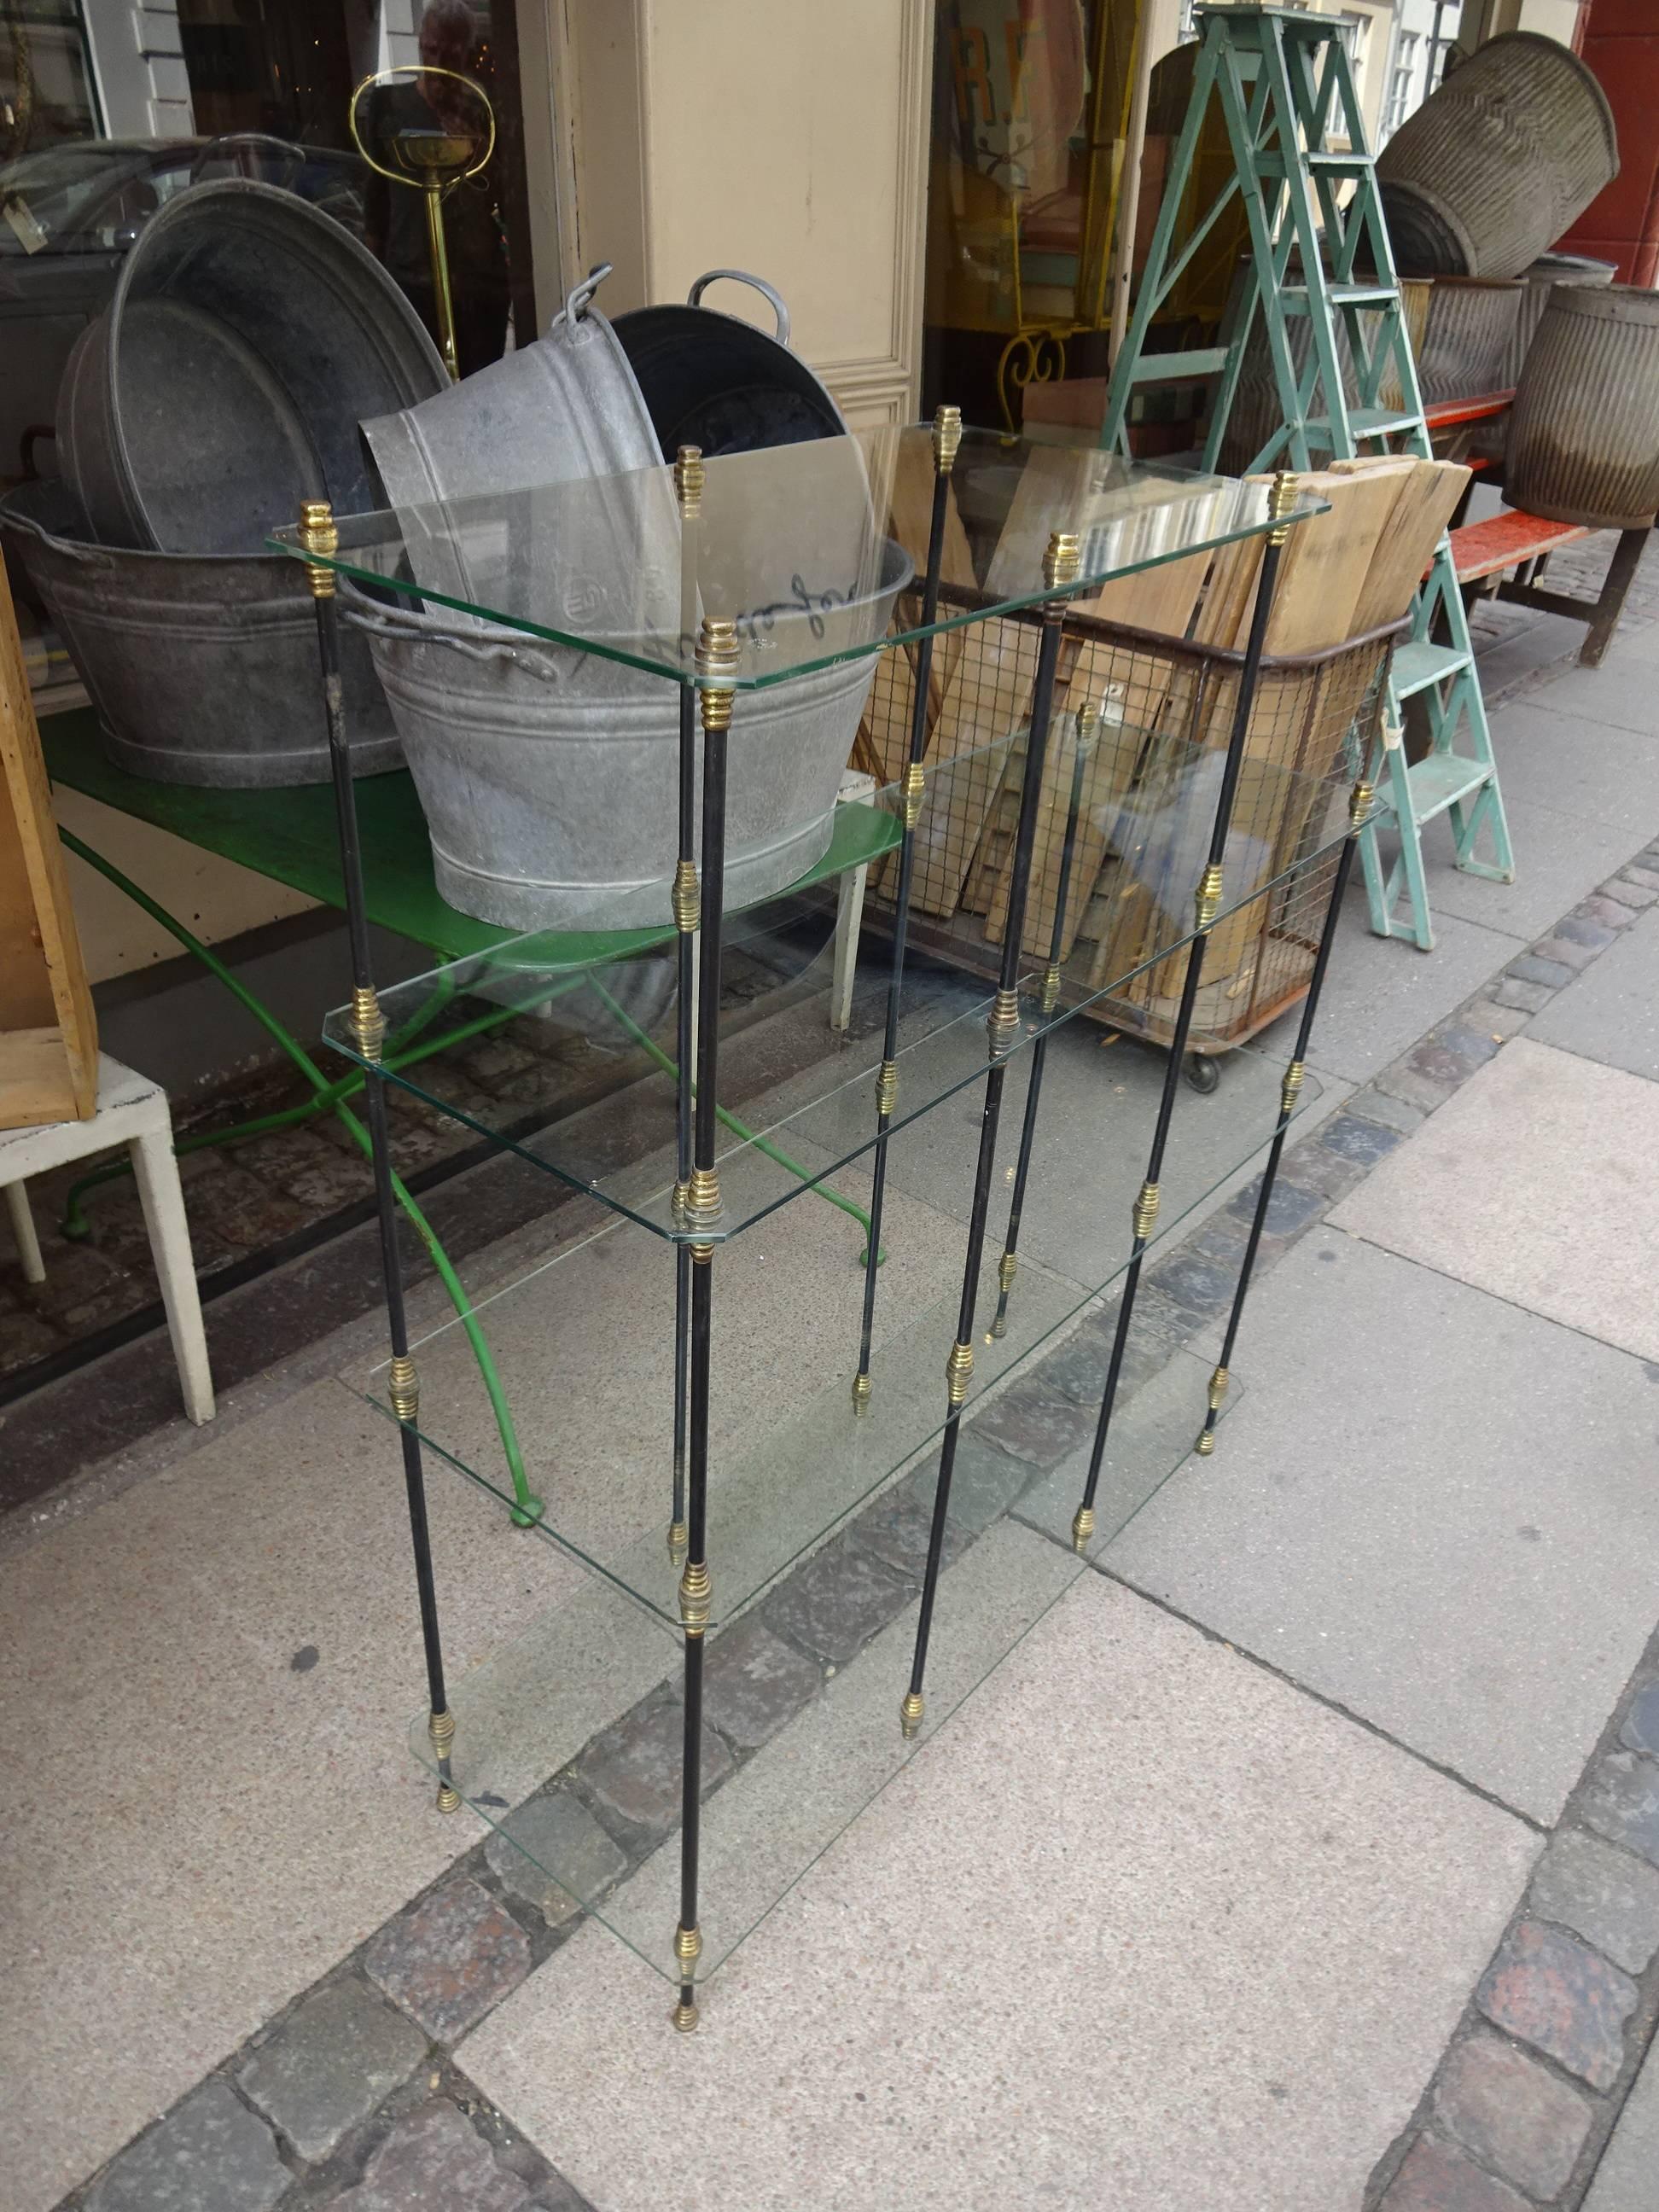 Elegant vintage French shelving unit. Beautifully made with slim elegant black rod legs and with decorative brass fittings and thin glass plates shelves. A beautiful and practical unit.